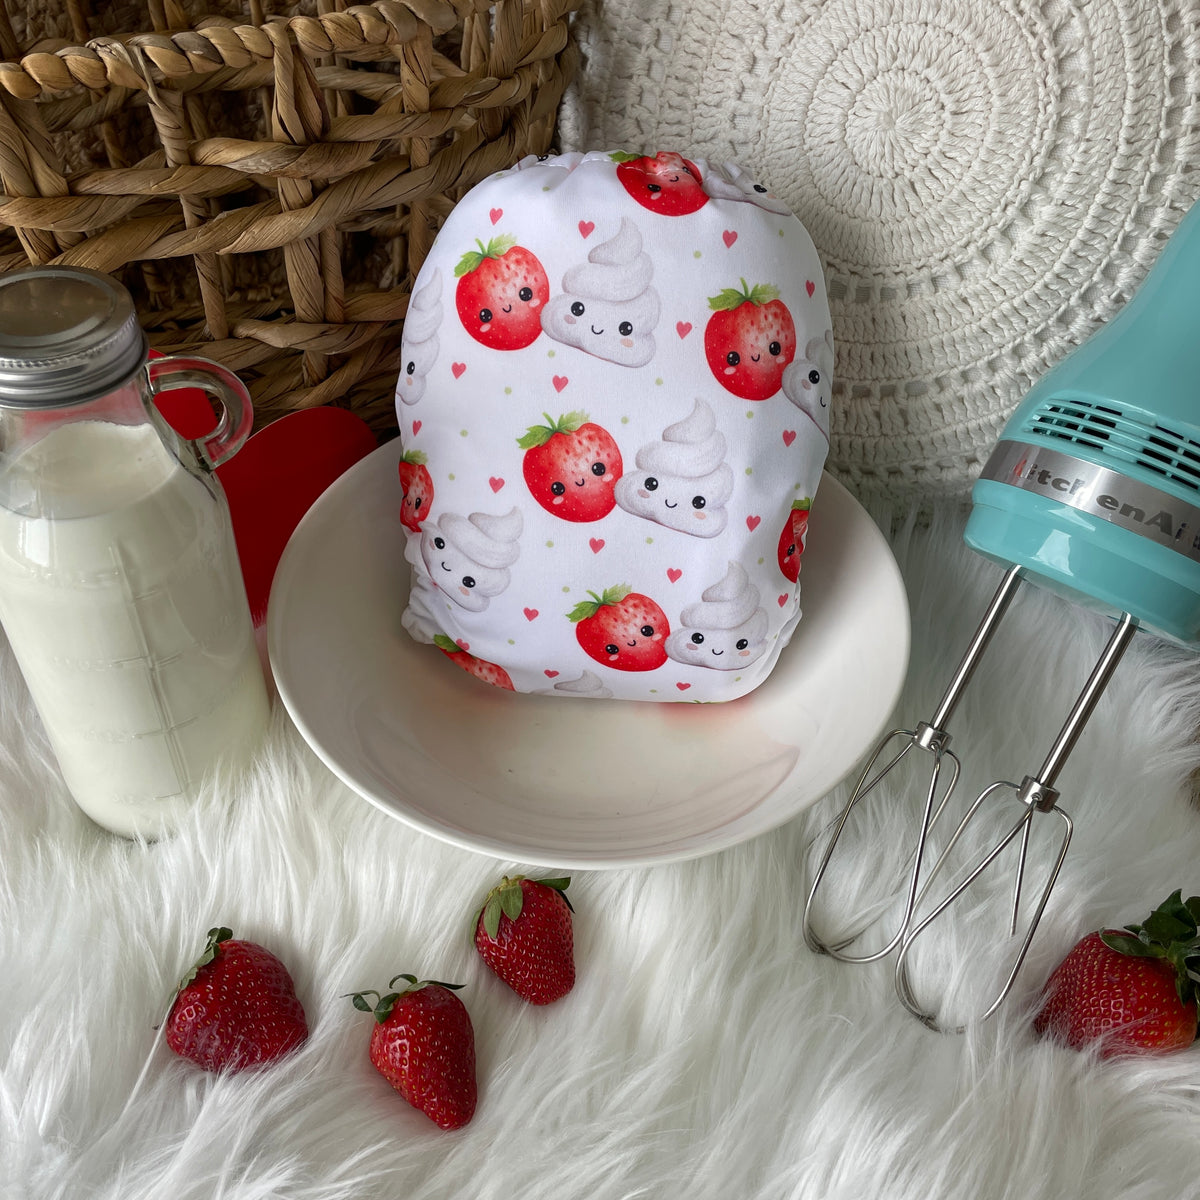 Les Confections Lili | Washable diaper | LARGE size | The Inseparables - Strawberry & Cream (Full Print)